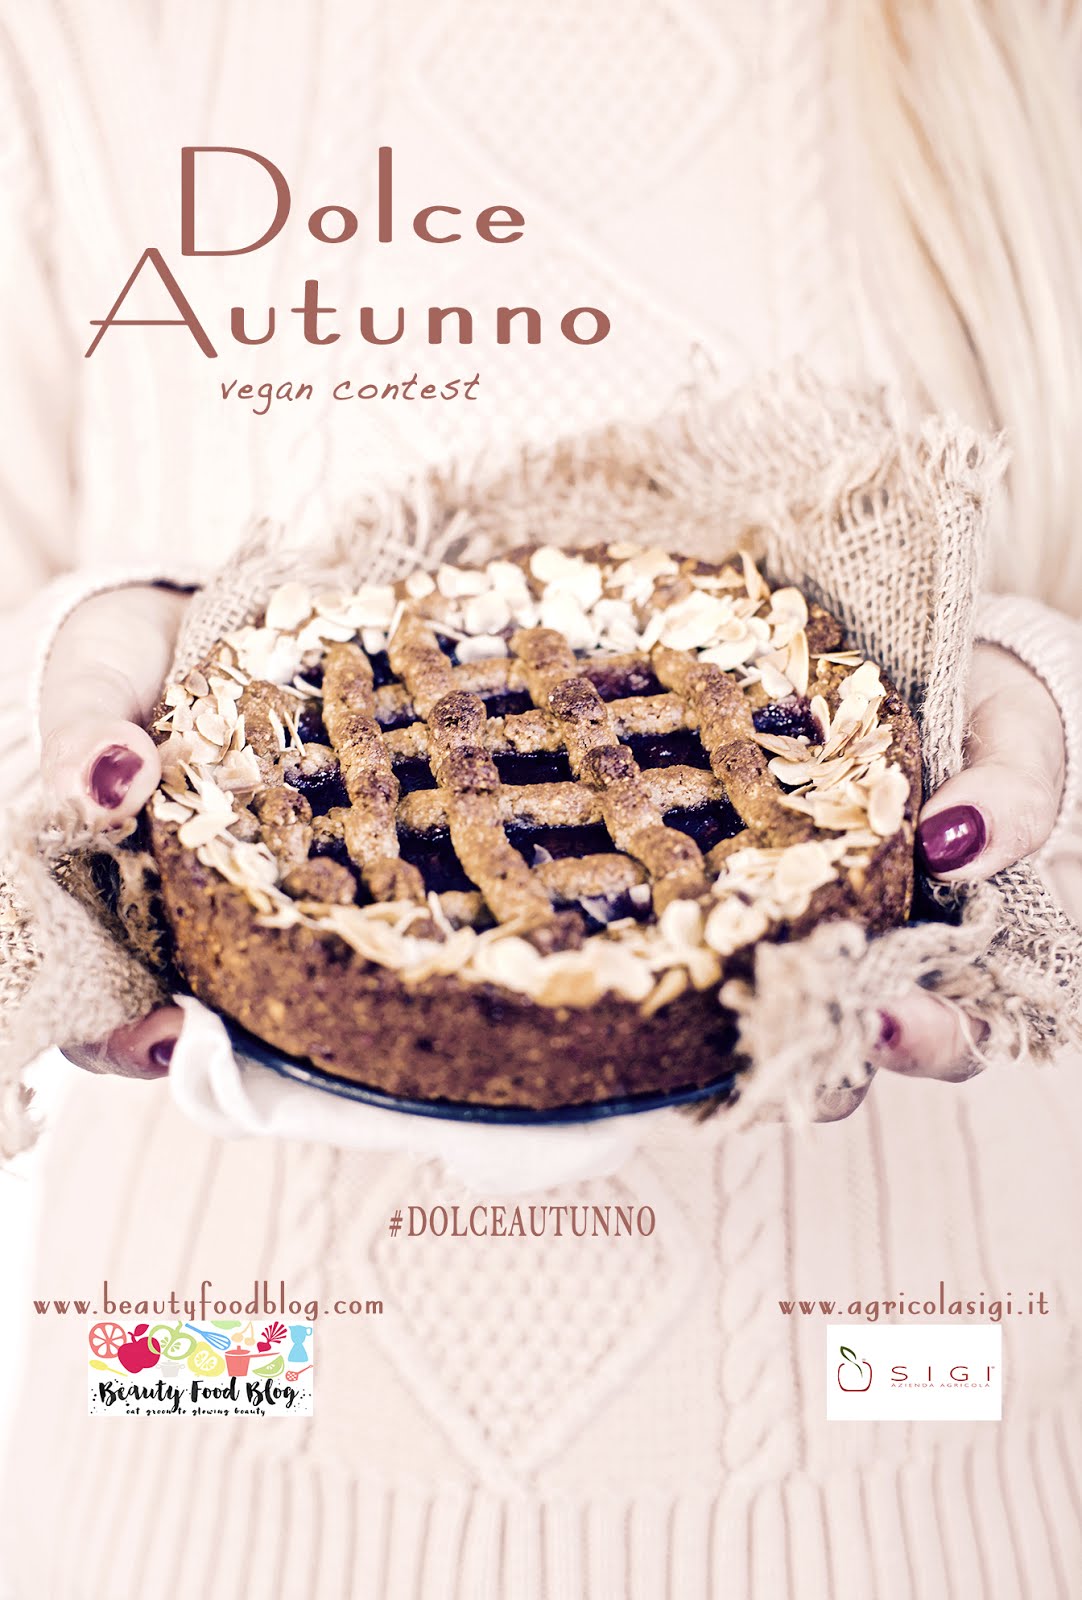 DOLCE AUTUNNO